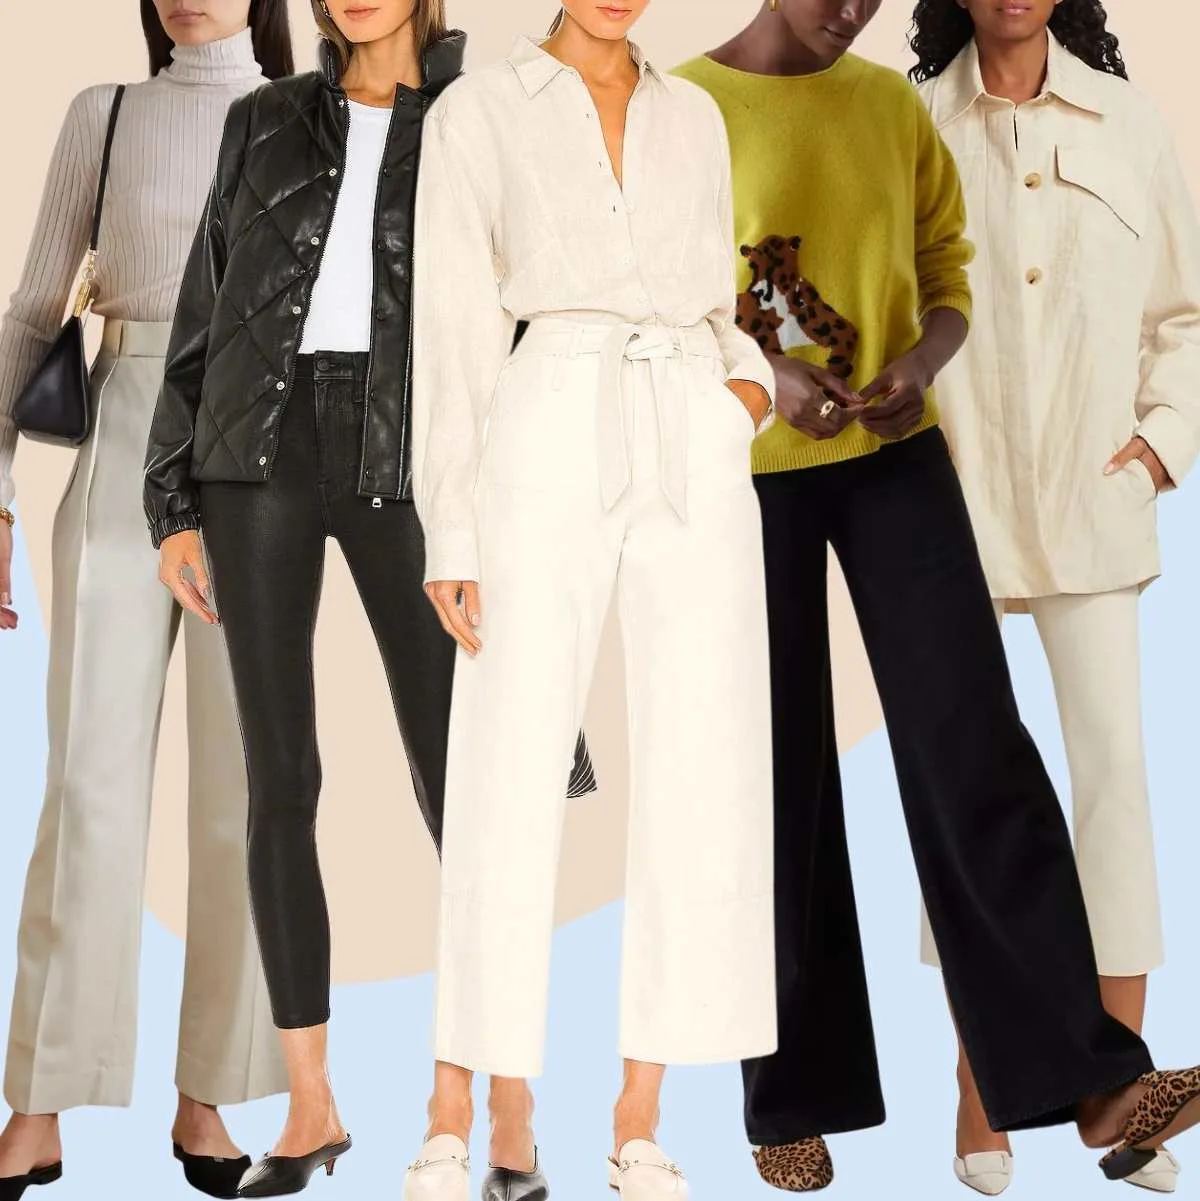 Collage of 5 women wearing different mules outfits with dress pants and suits.